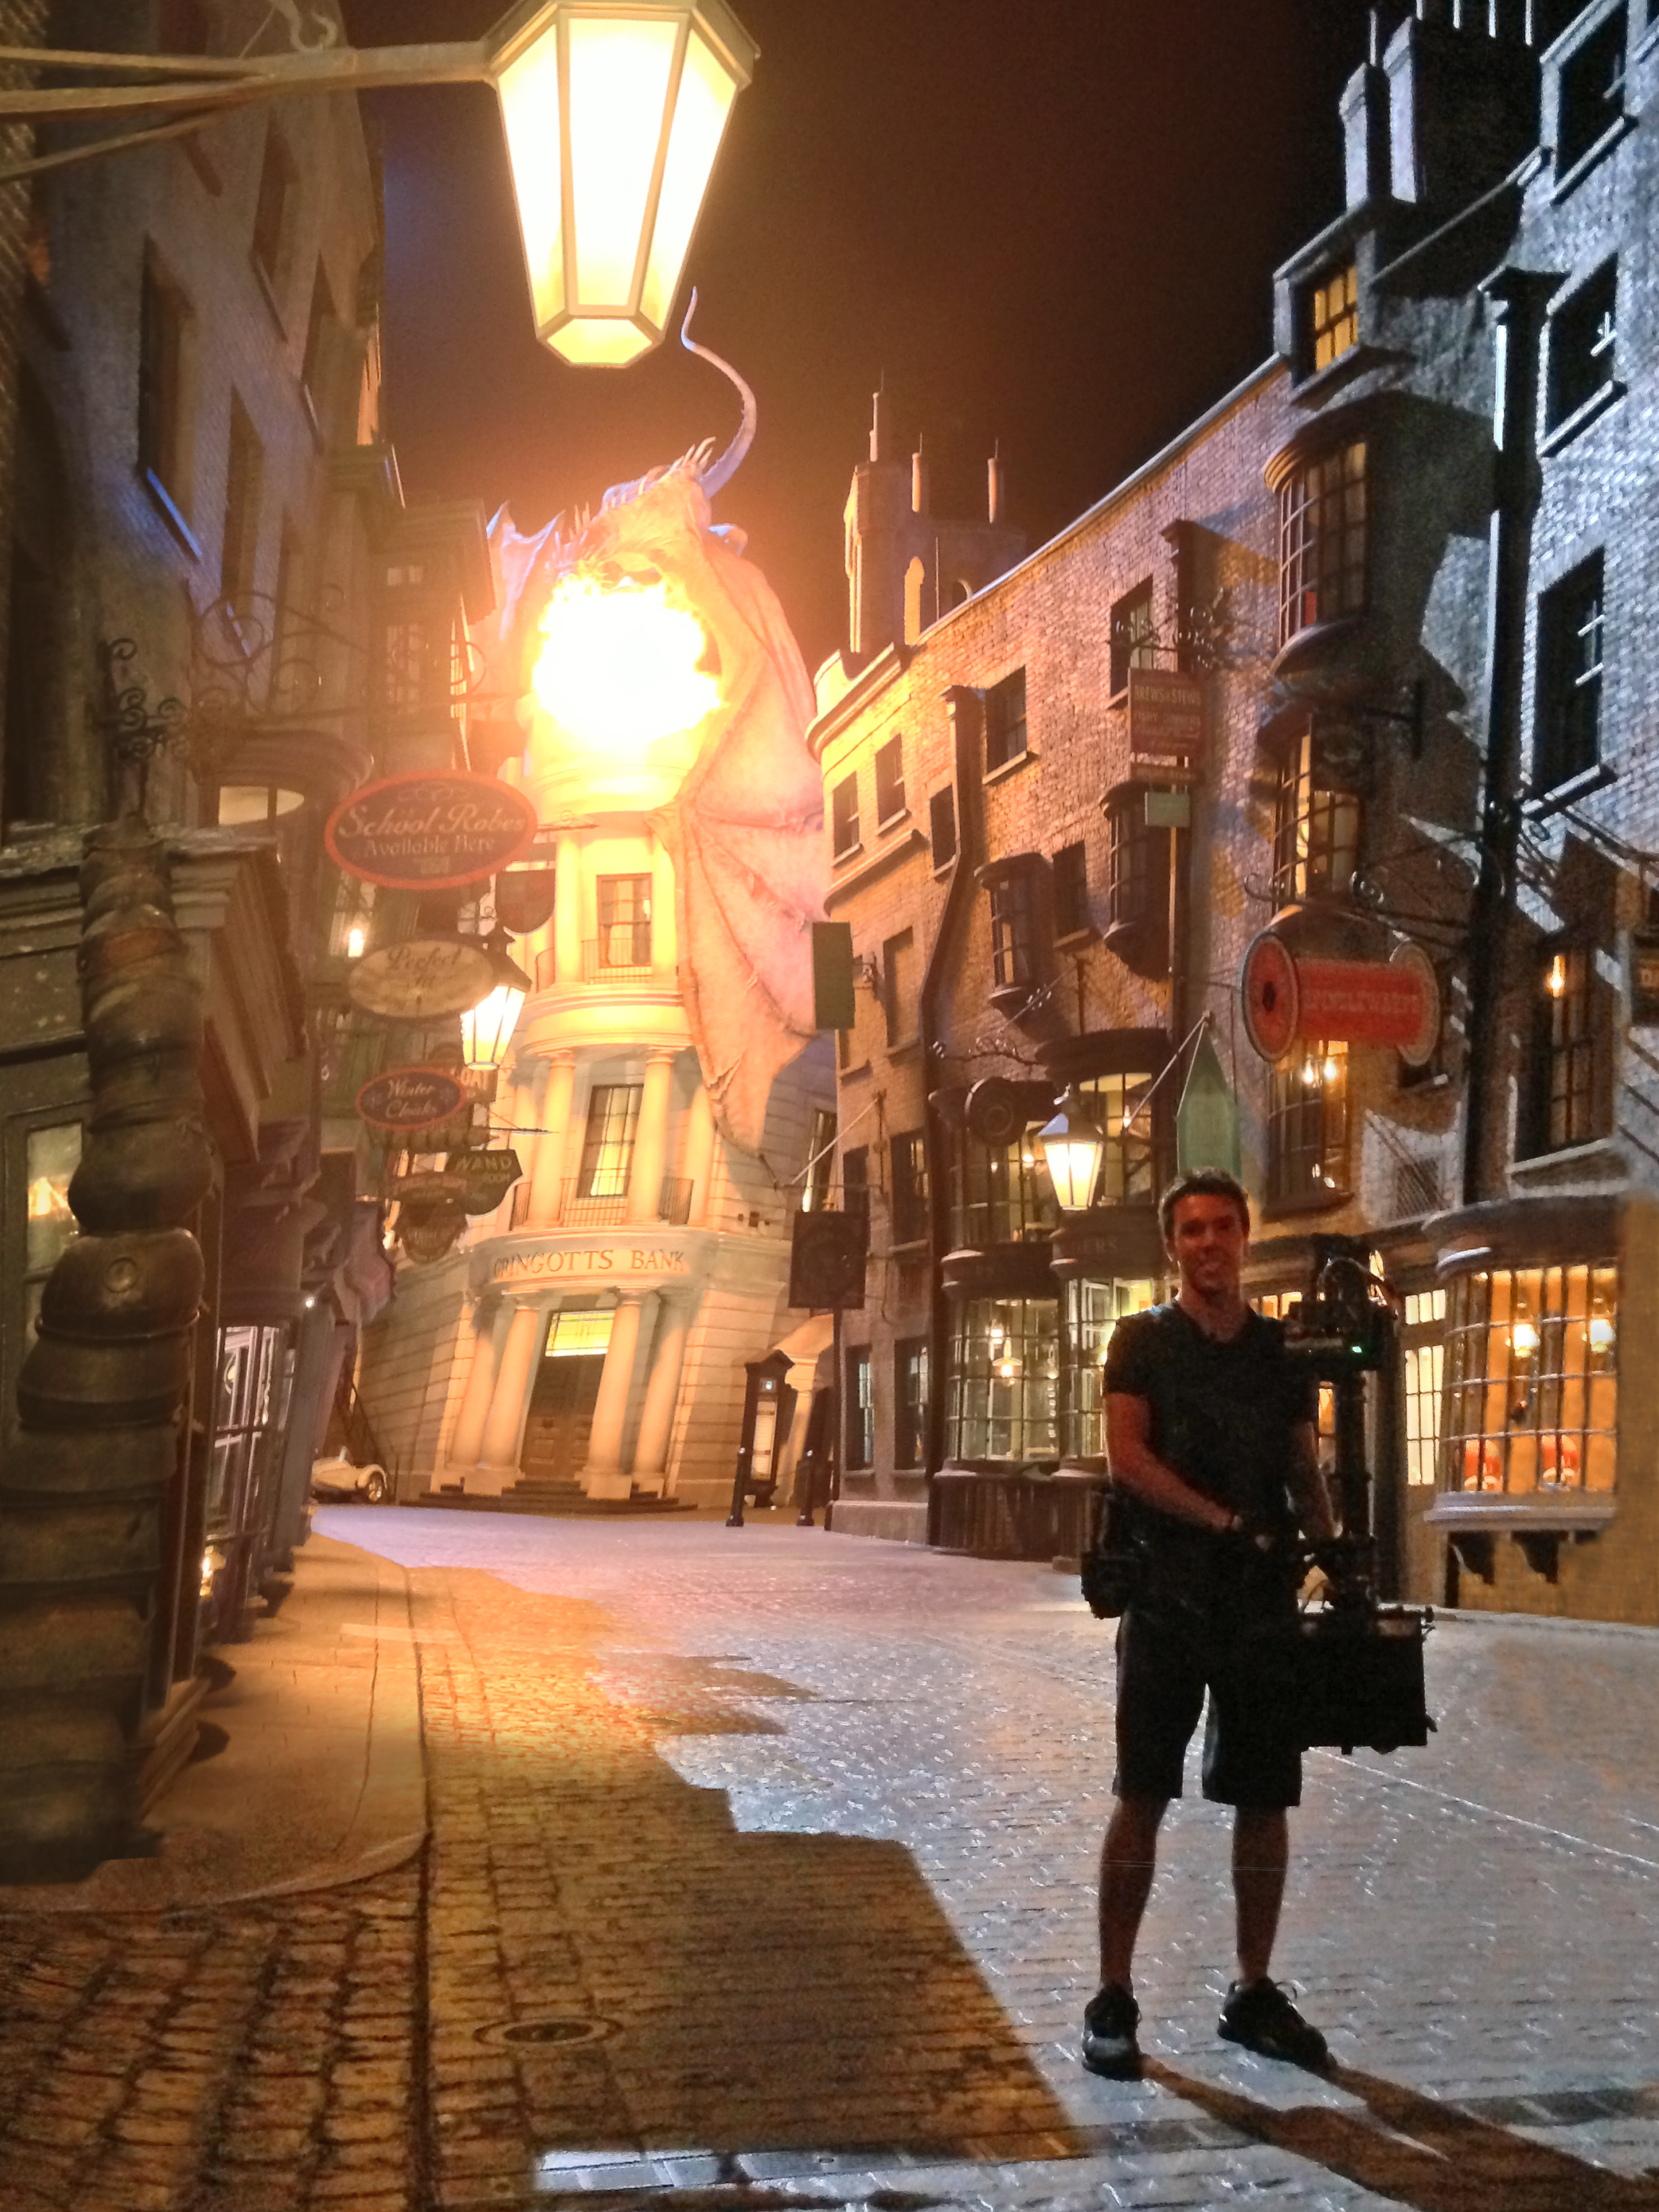 Standing in Diagon Alley with the fire breathing dragon after a successfull shoot for the Harry Potter commercials